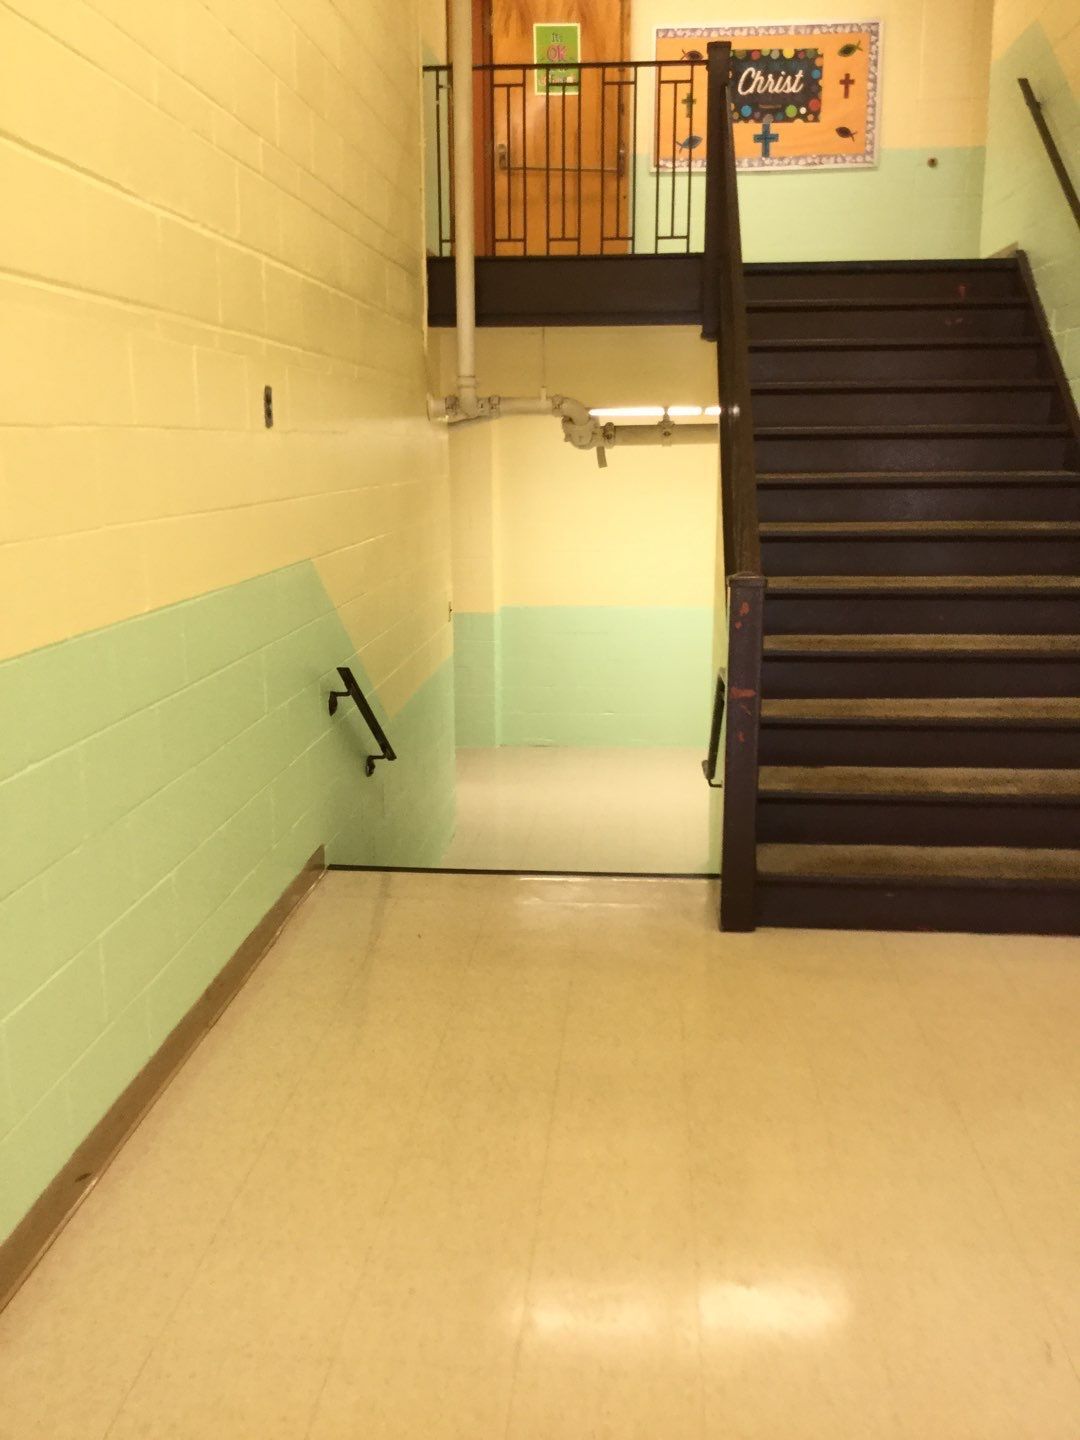 a hallway with stairs and a sign on the wall that says open